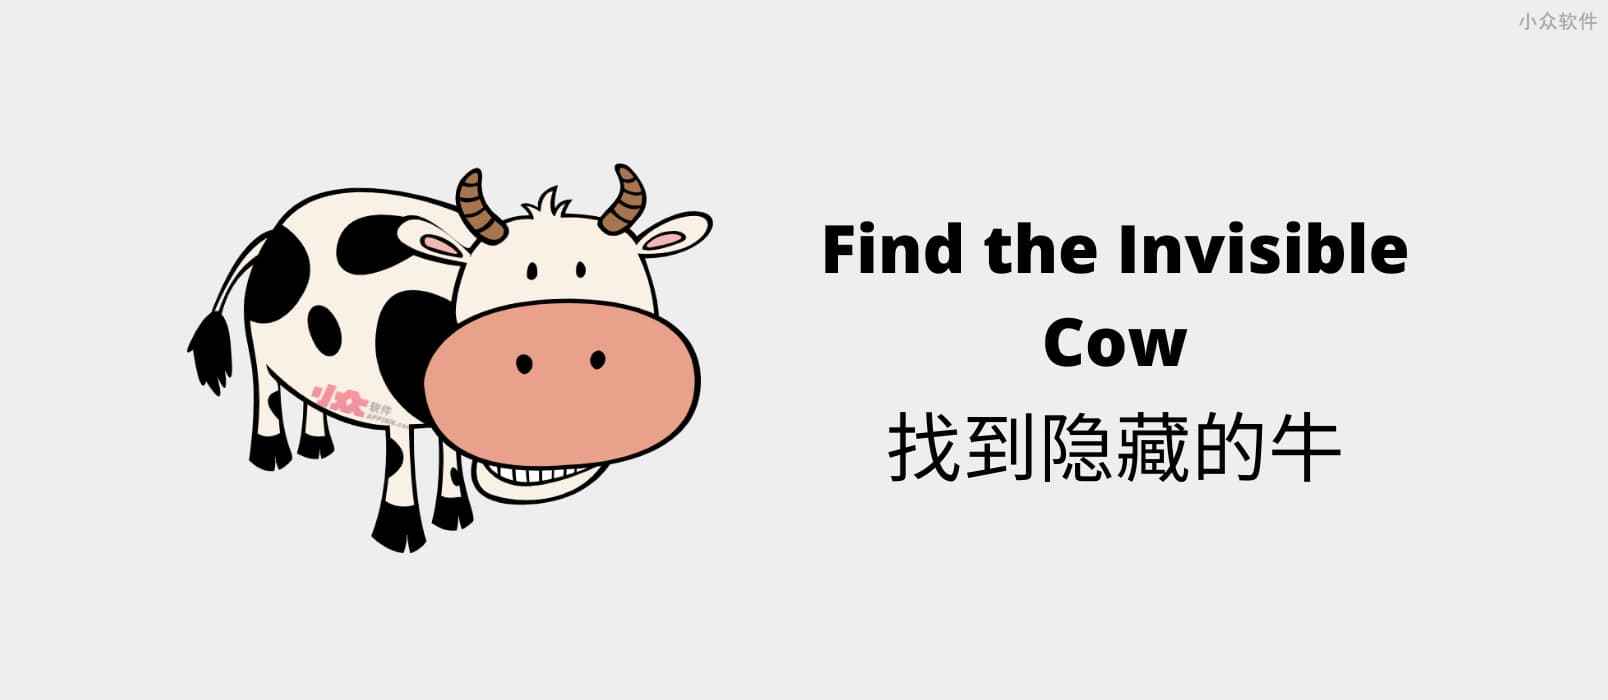 Find the Invisible Cow - 找到隐藏的牛，鼠标距离越近，它叫的越响[Web]
